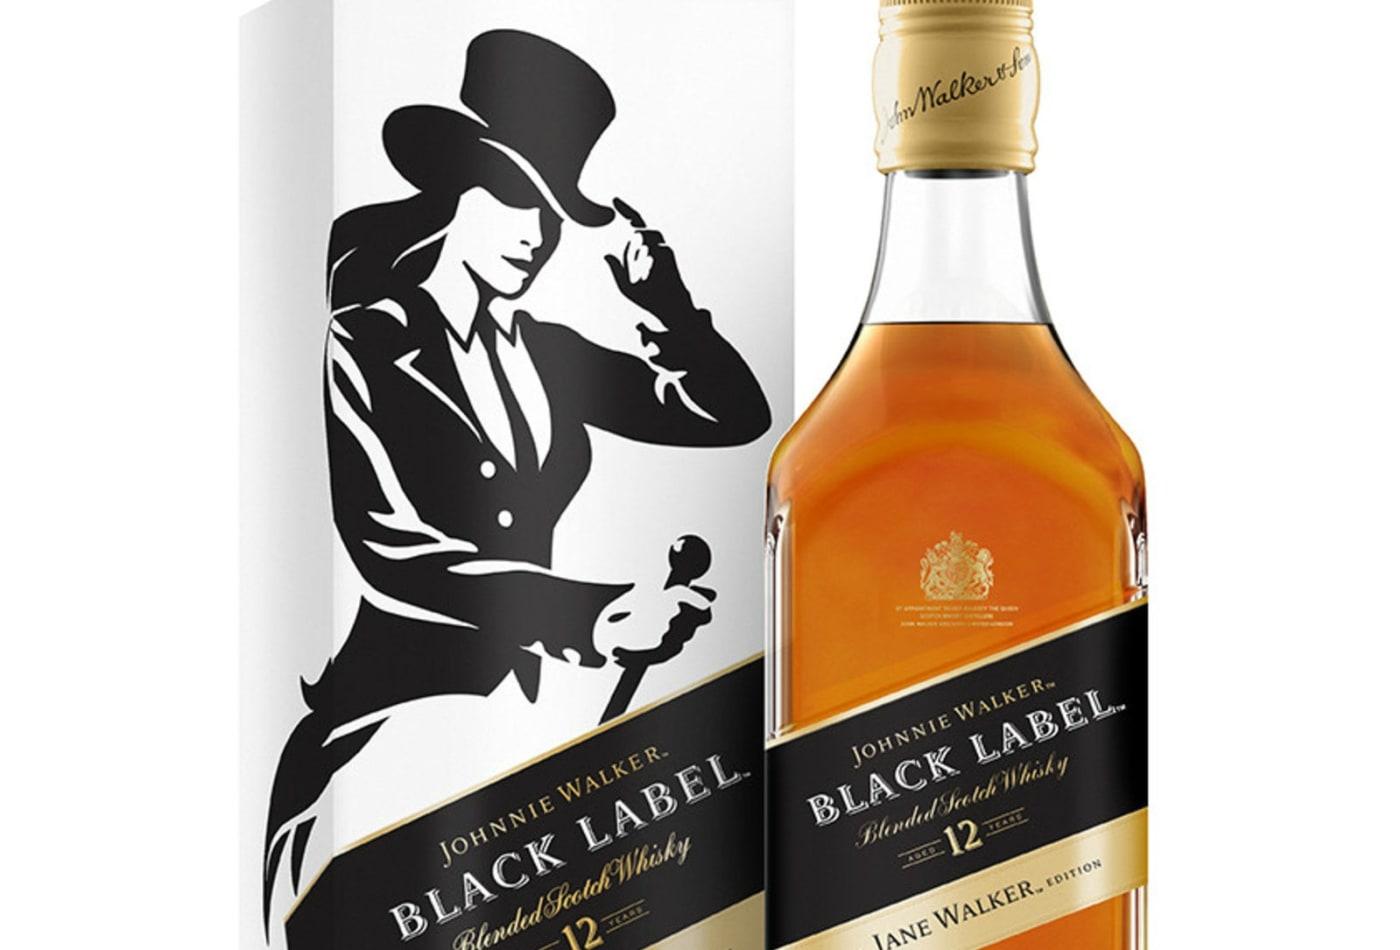 Johnnie Walker Logo - Johnnie Walker whisky replaces striding man with walking woman Jane